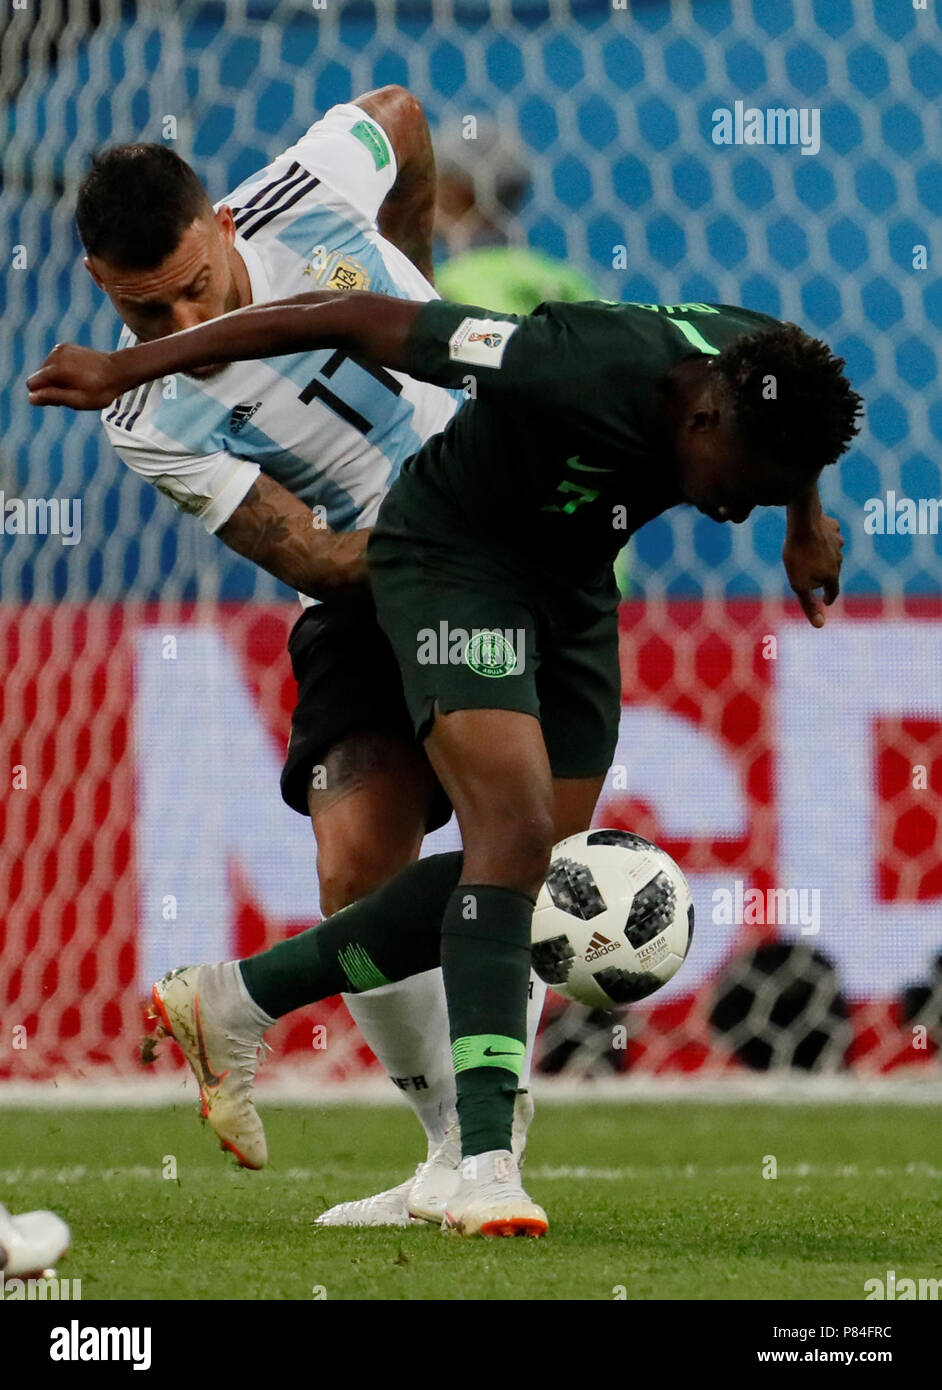 SAINT PETERSBURG, RUSSIA - JUNE 26: Ahmed Musa (R) of Nigeria national team and Nicolas Otamendi of Argentina national team vie for the ball during the 2018 FIFA World Cup Russia group D match between Nigeria and Argentina at Saint Petersburg Stadium on June 26, 2018 in Saint Petersburg, Russia. (MB Media) Stock Photo